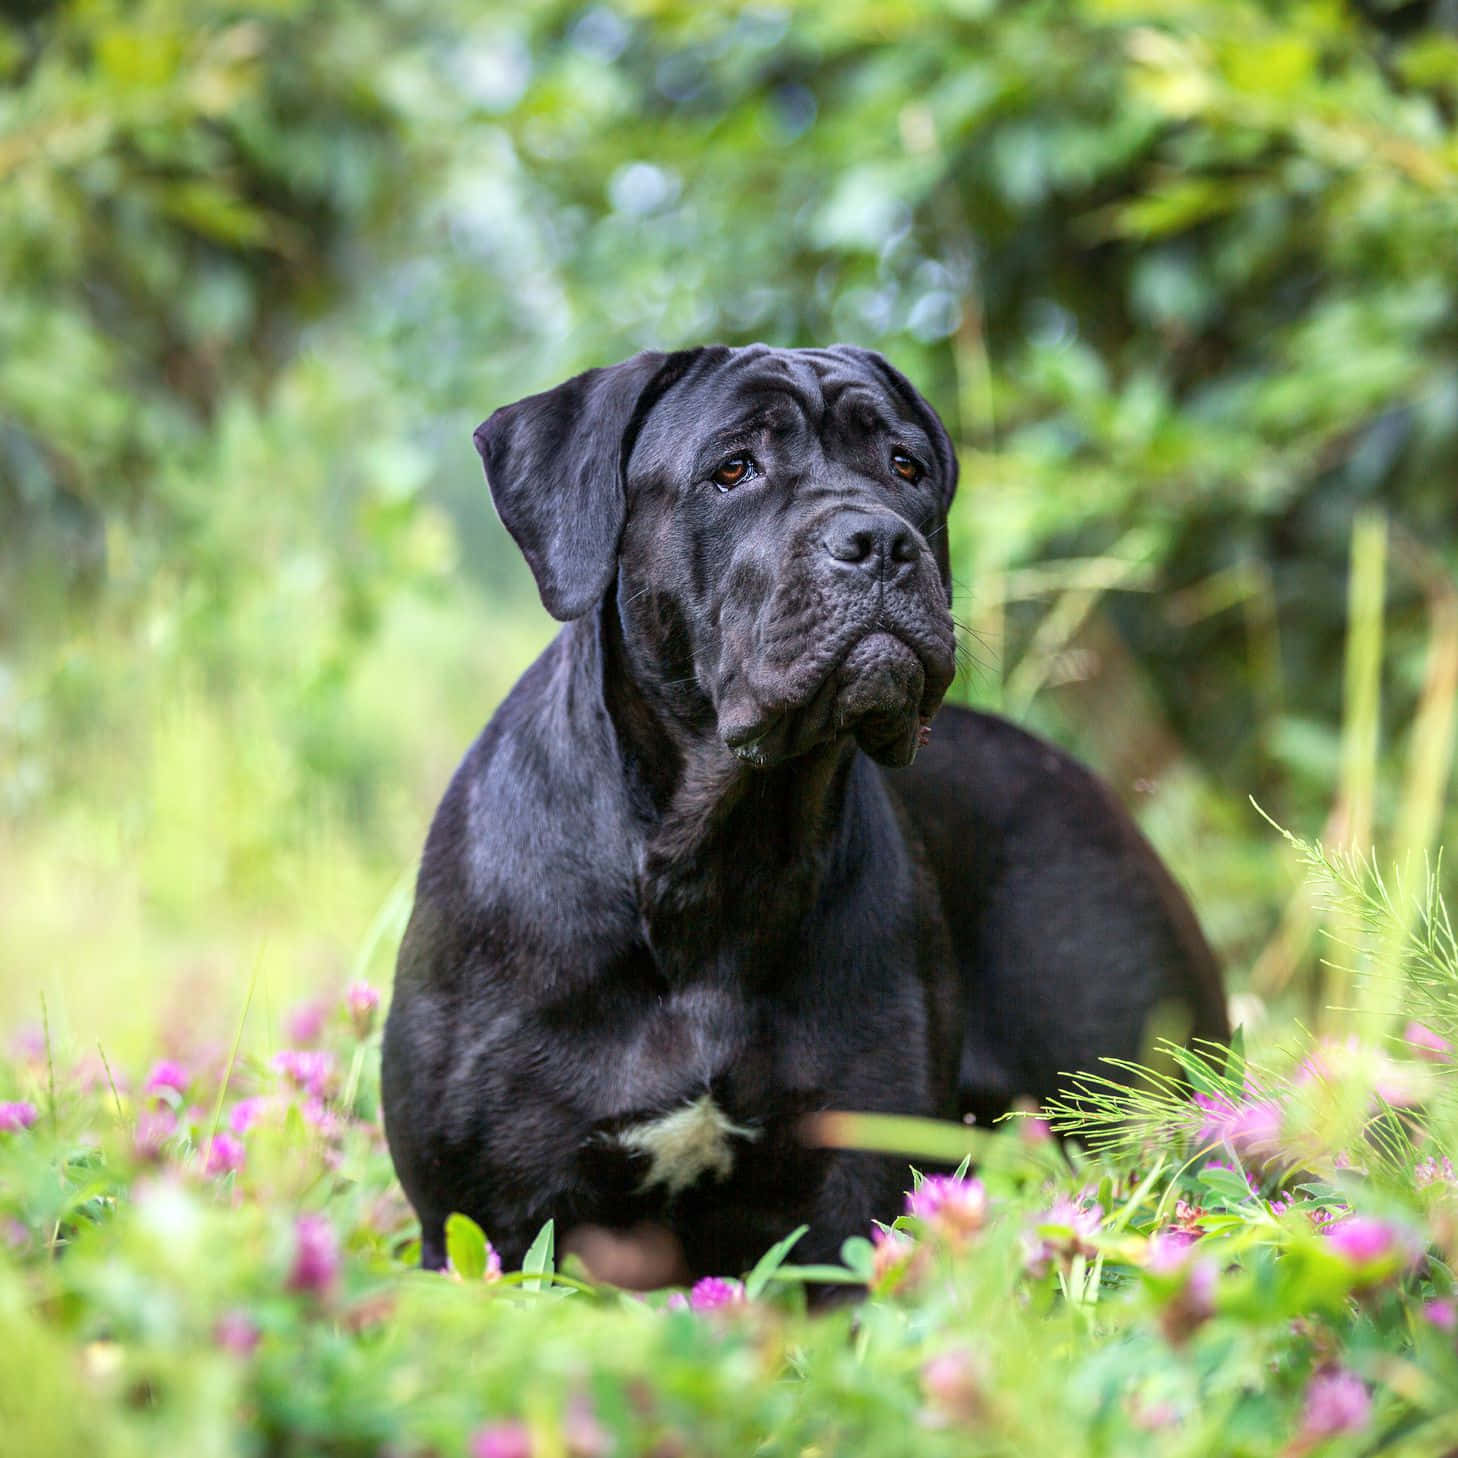 Admire the majesty of the Cane Corso